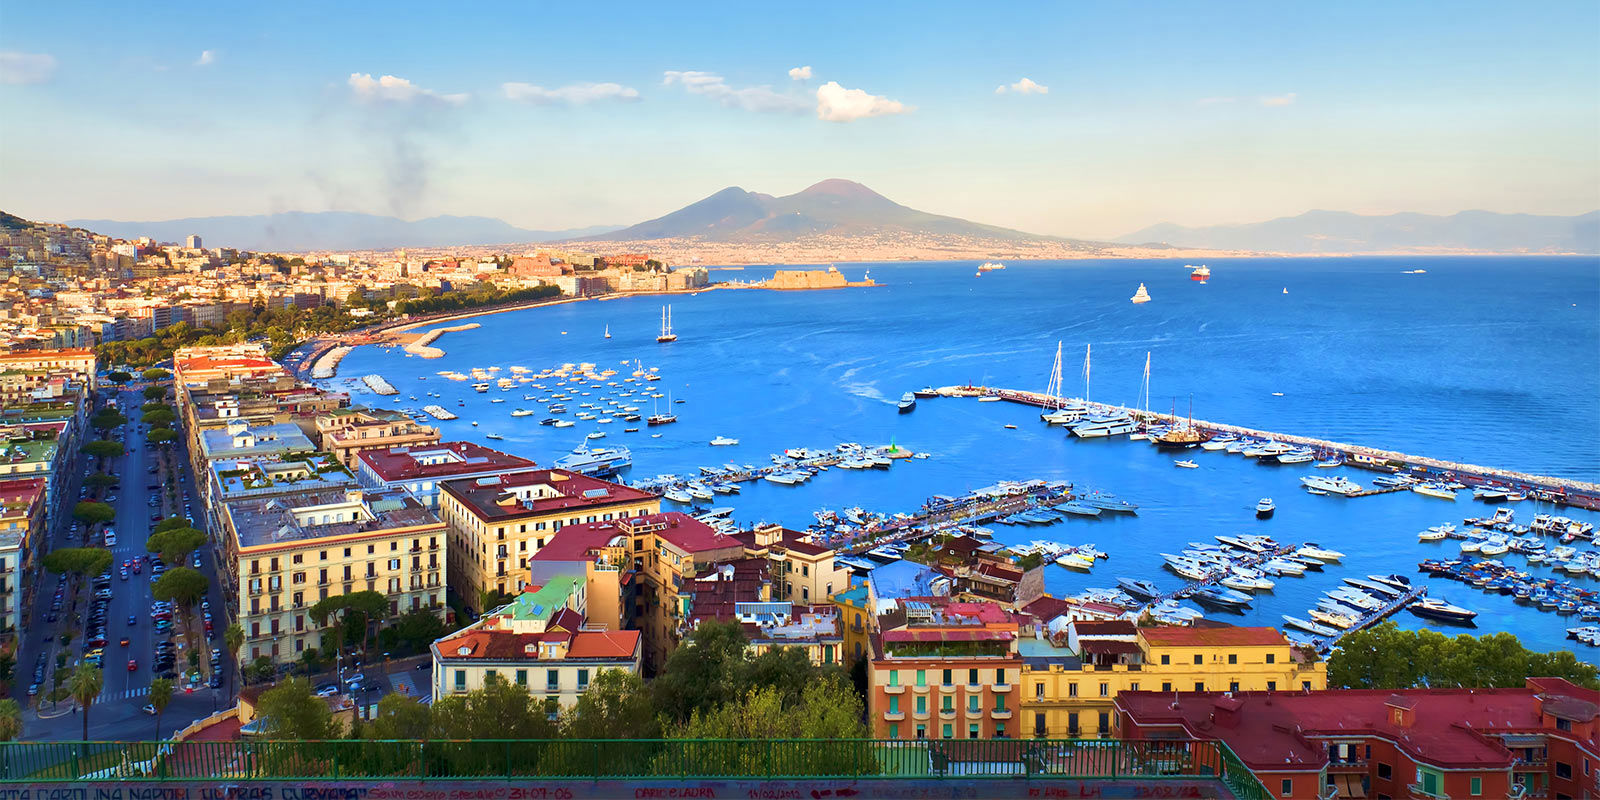 LHP Suite Napoli - Hotel to Attend Events in Naples 4